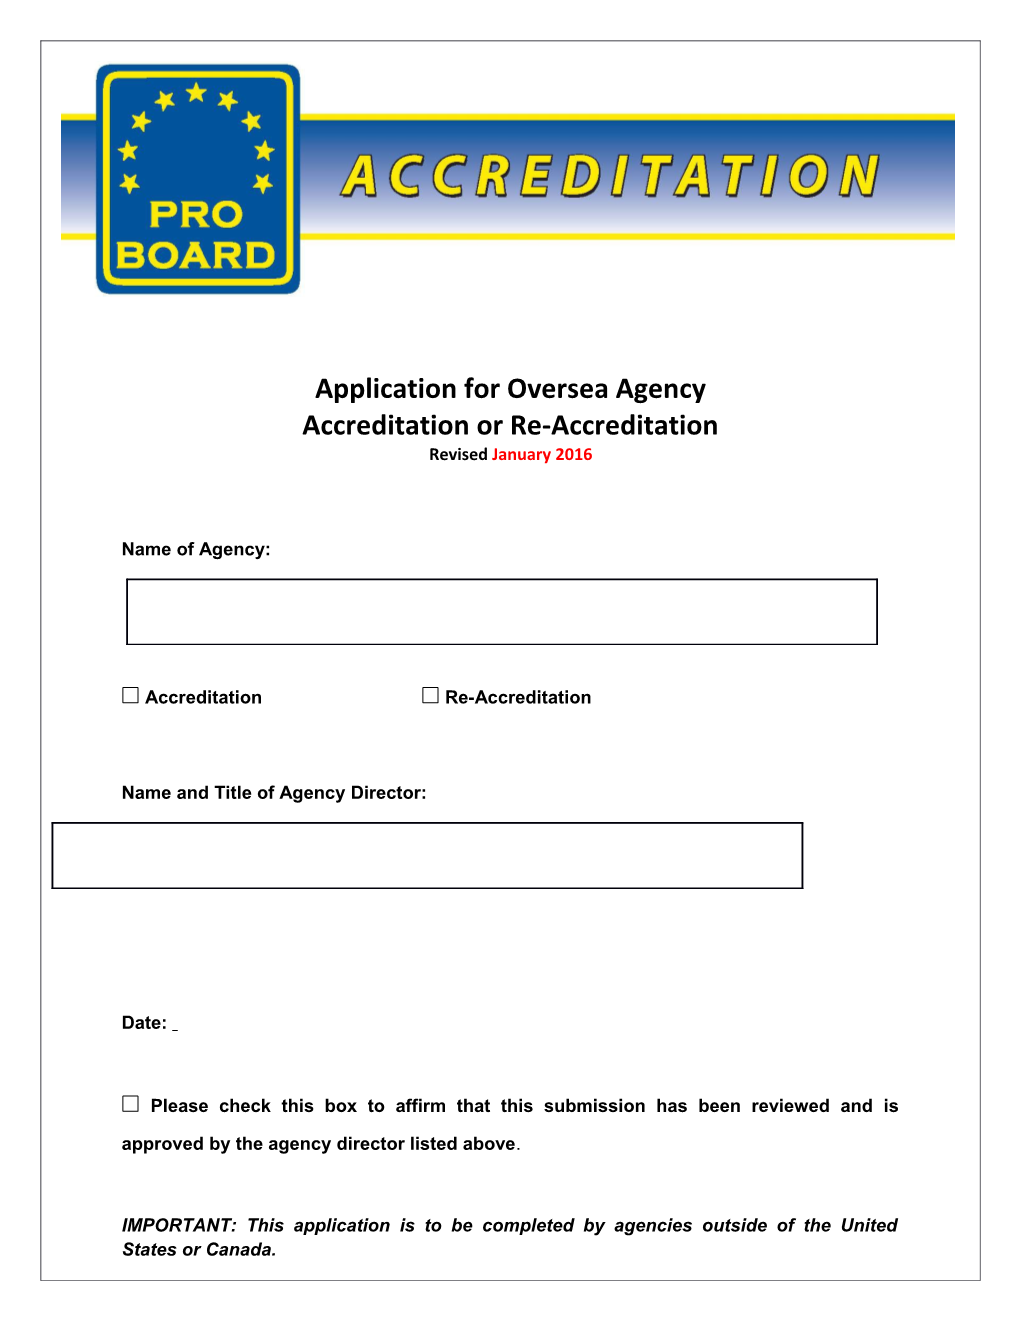 Application for Overseaagency